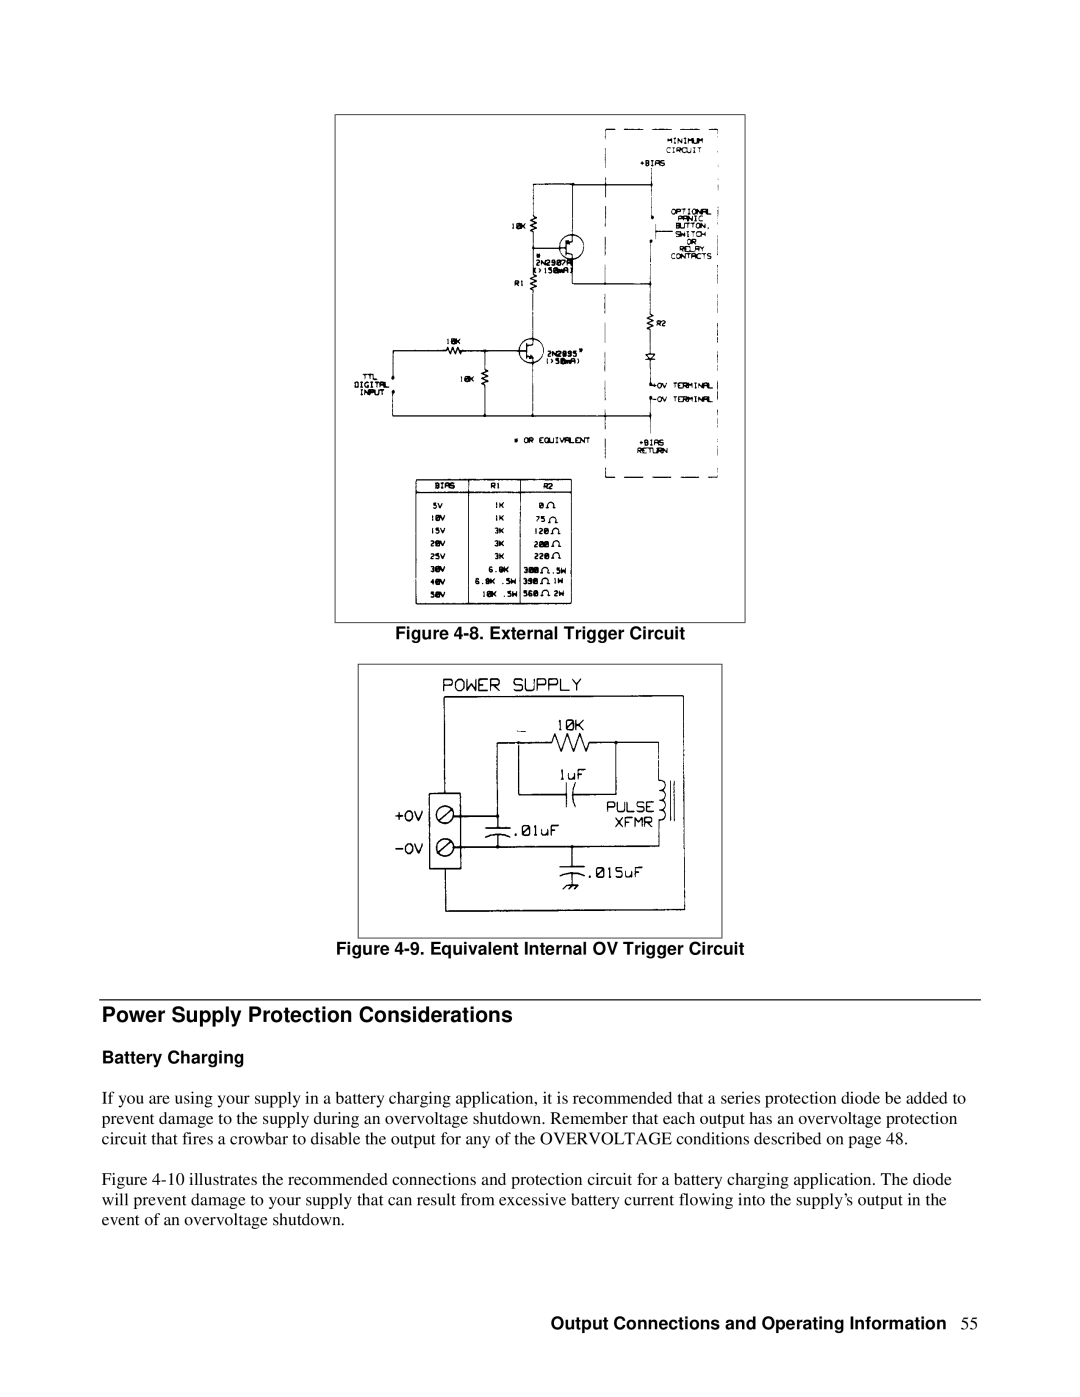 Agilent Technologies 6629A, 6626A, 6628A, 6625A manual Power Supply Protection Considerations, Battery Charging 